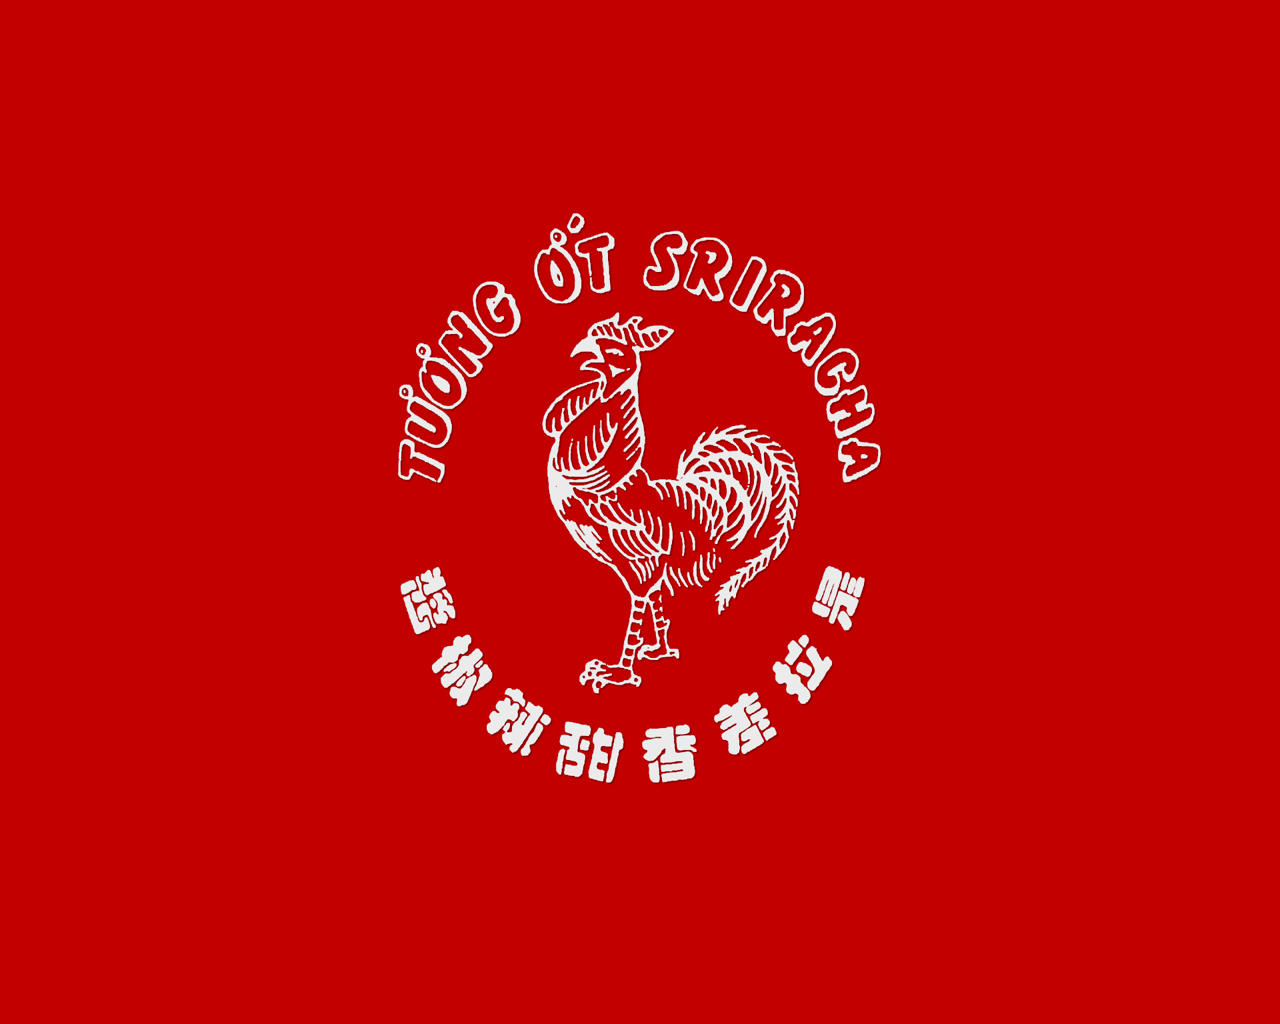 Sriracha Rooster Sauce Wallpaper Other Sizes